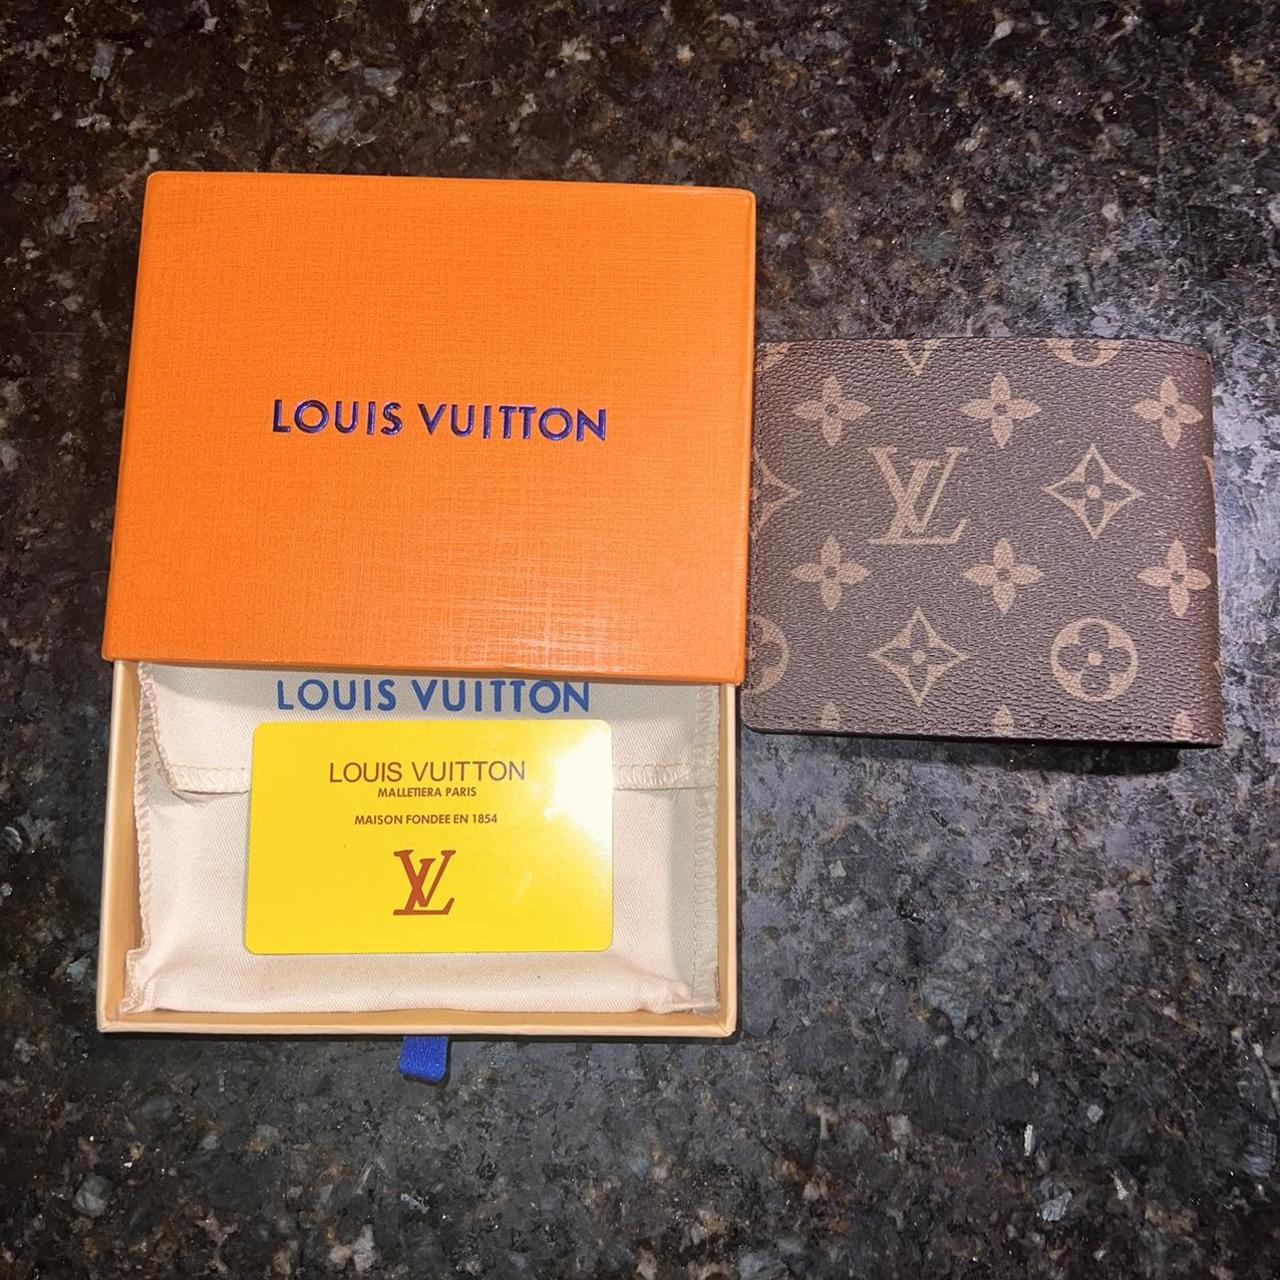 Gently used Louis Vuitton wallet. I don’t want it